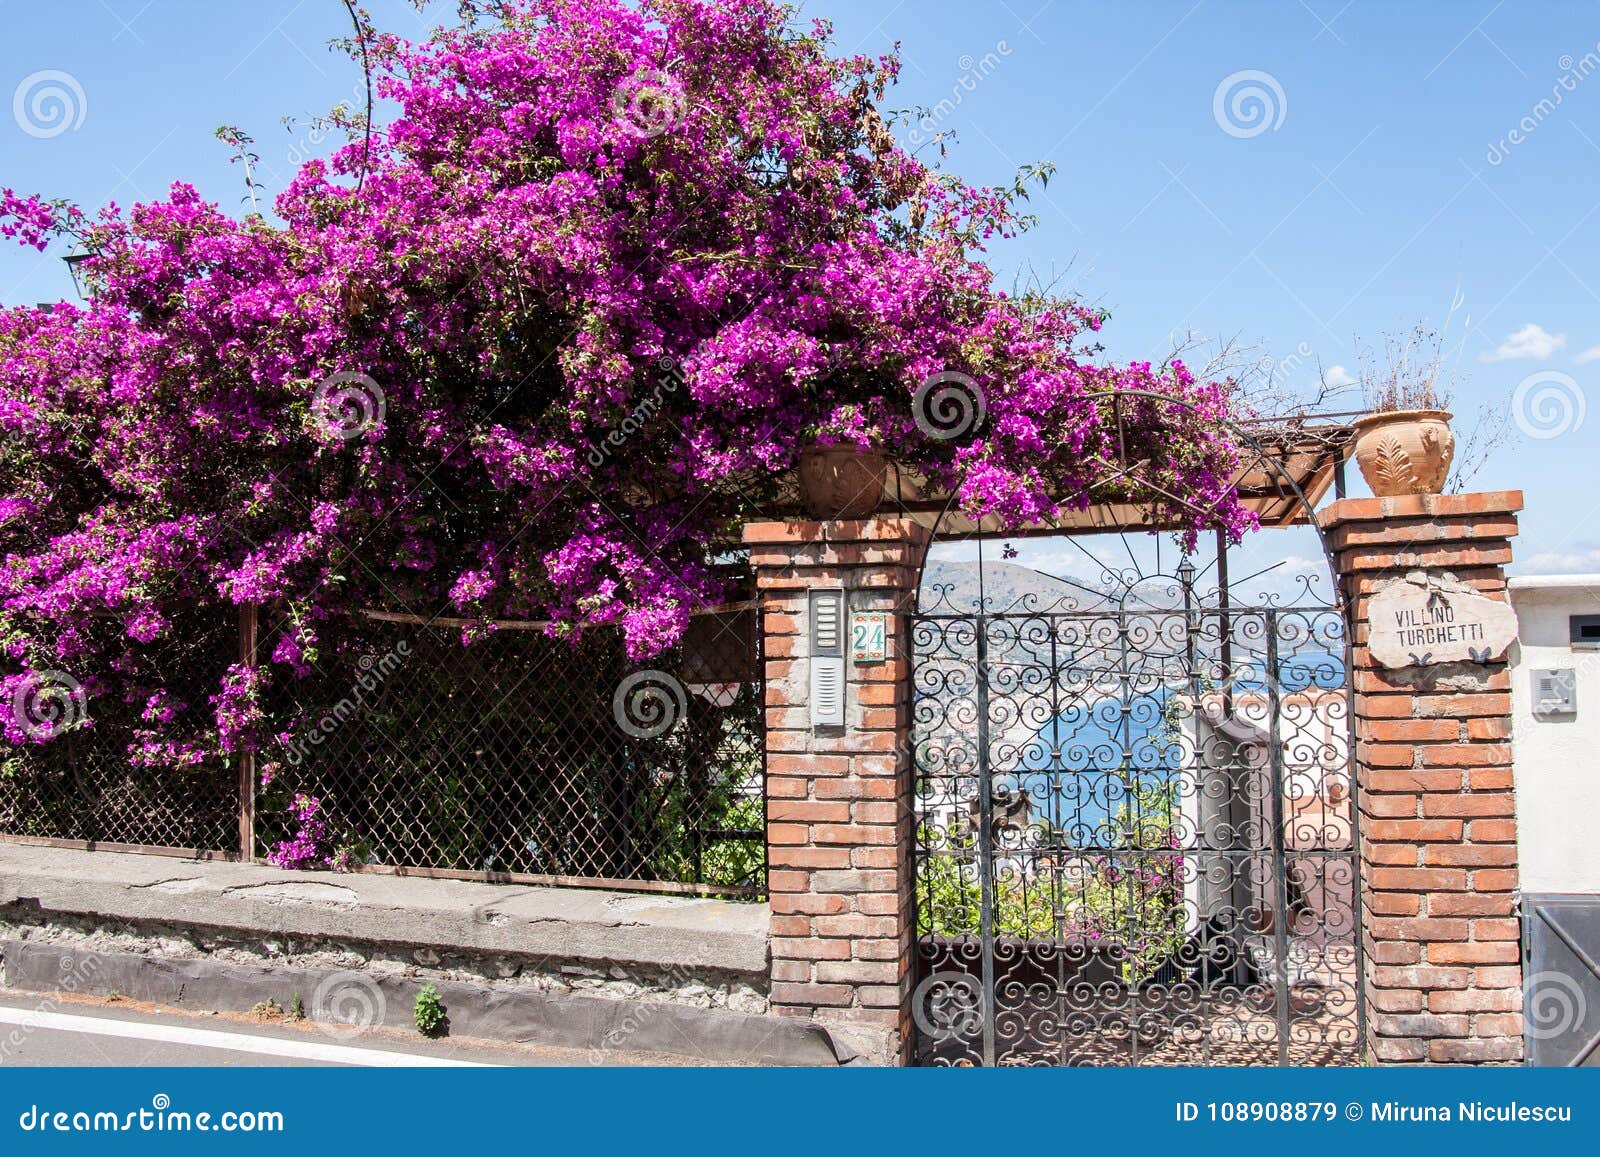 Bougainvillea Spectabilis On A Stone Wall Editorial Stock Image Image